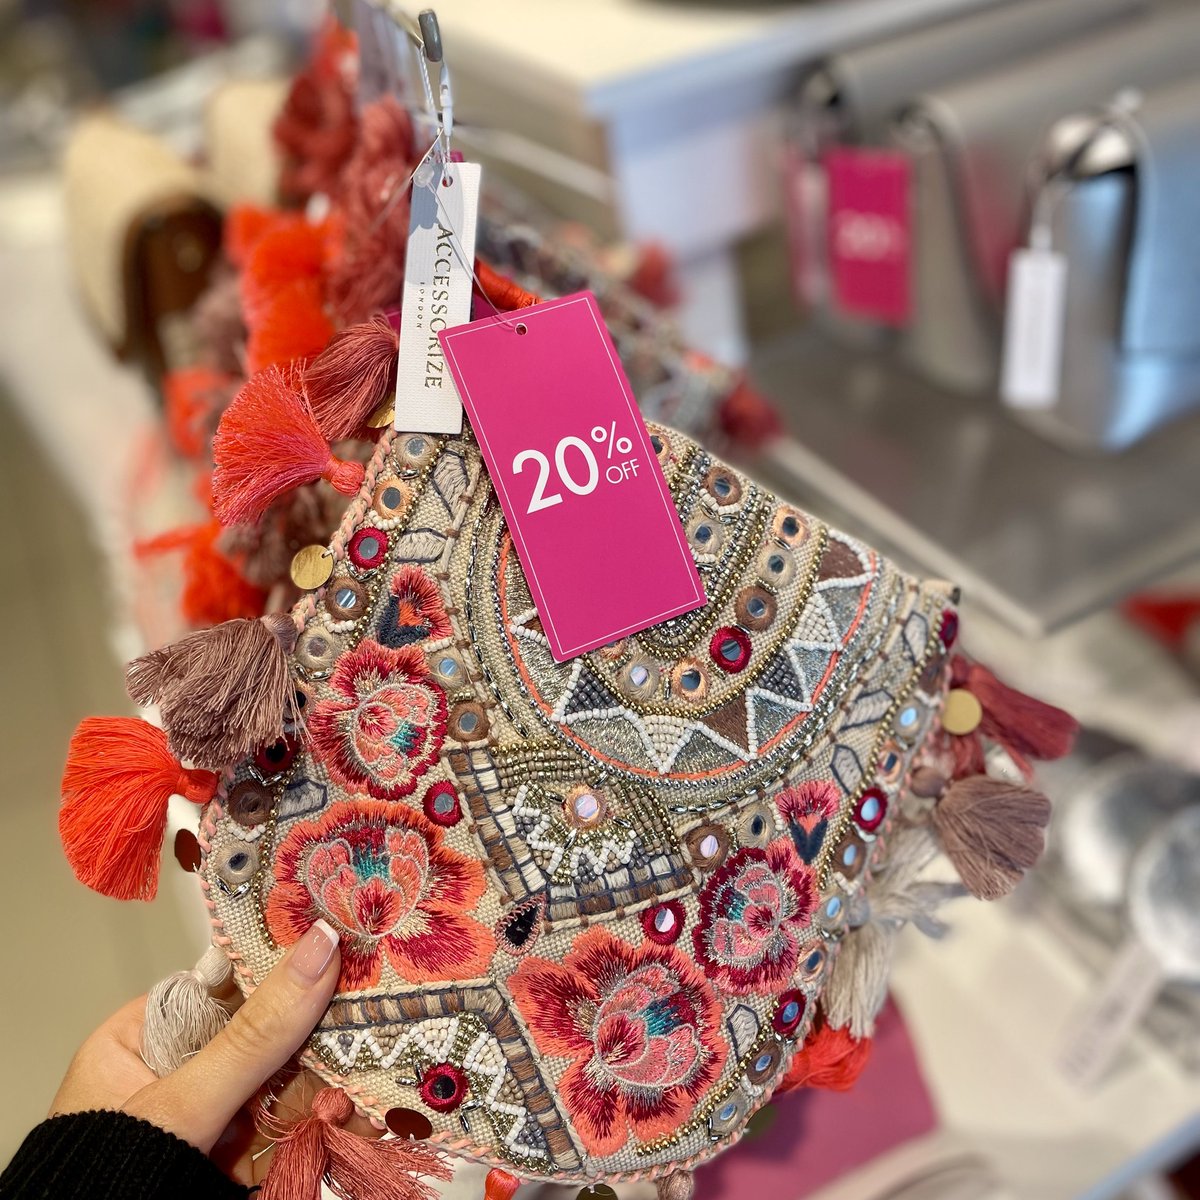 If there was a bag made for the festival season, then this is IT! 🌸 Shop this show-stopping, floral boho embellished cross-body bag at Accessorize Durham, now with 20% OFF!

#PrinceBishopsPlace #FestivalInspo #FestivalWear #FestivalSeason #Boho #FestivalBag #DurhamPride #Durham